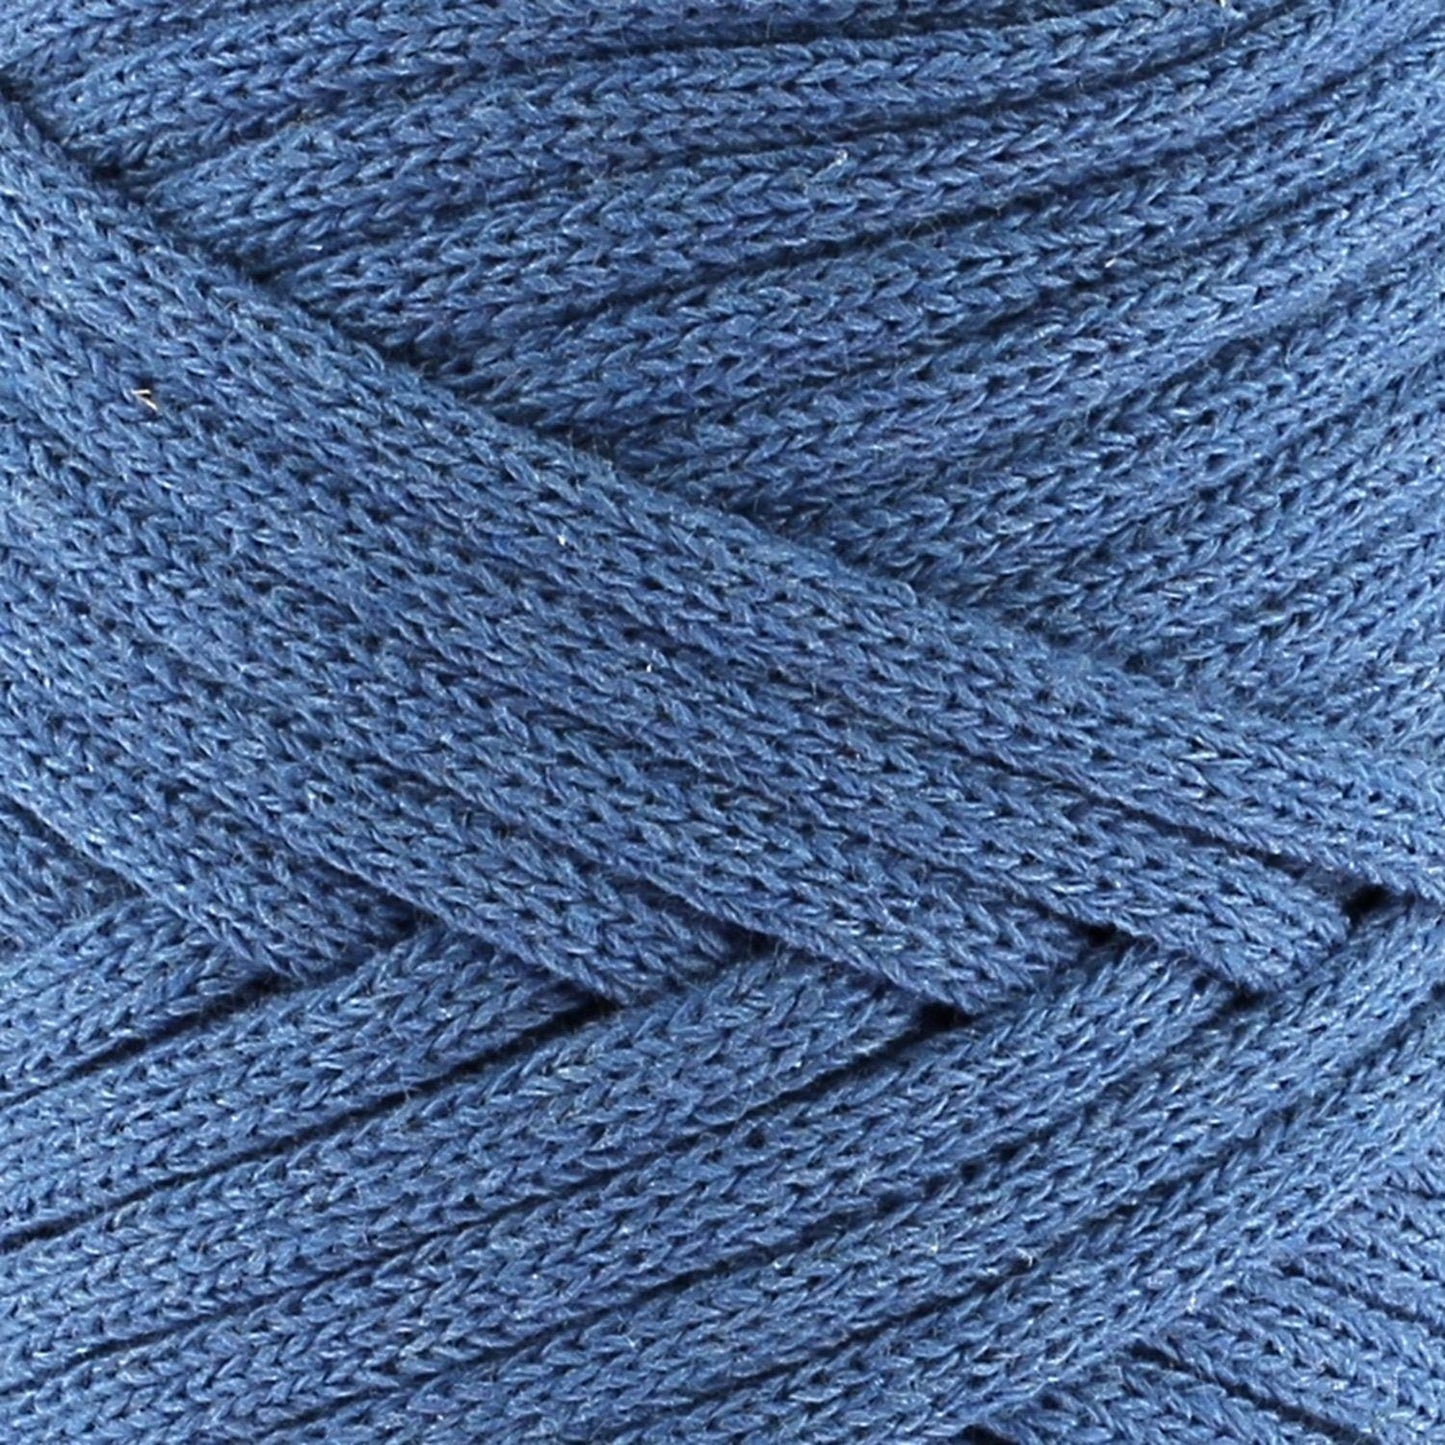 [Hoooked] Cordino Imperial Blue Cotton Macrame Cord - 54M, 150g